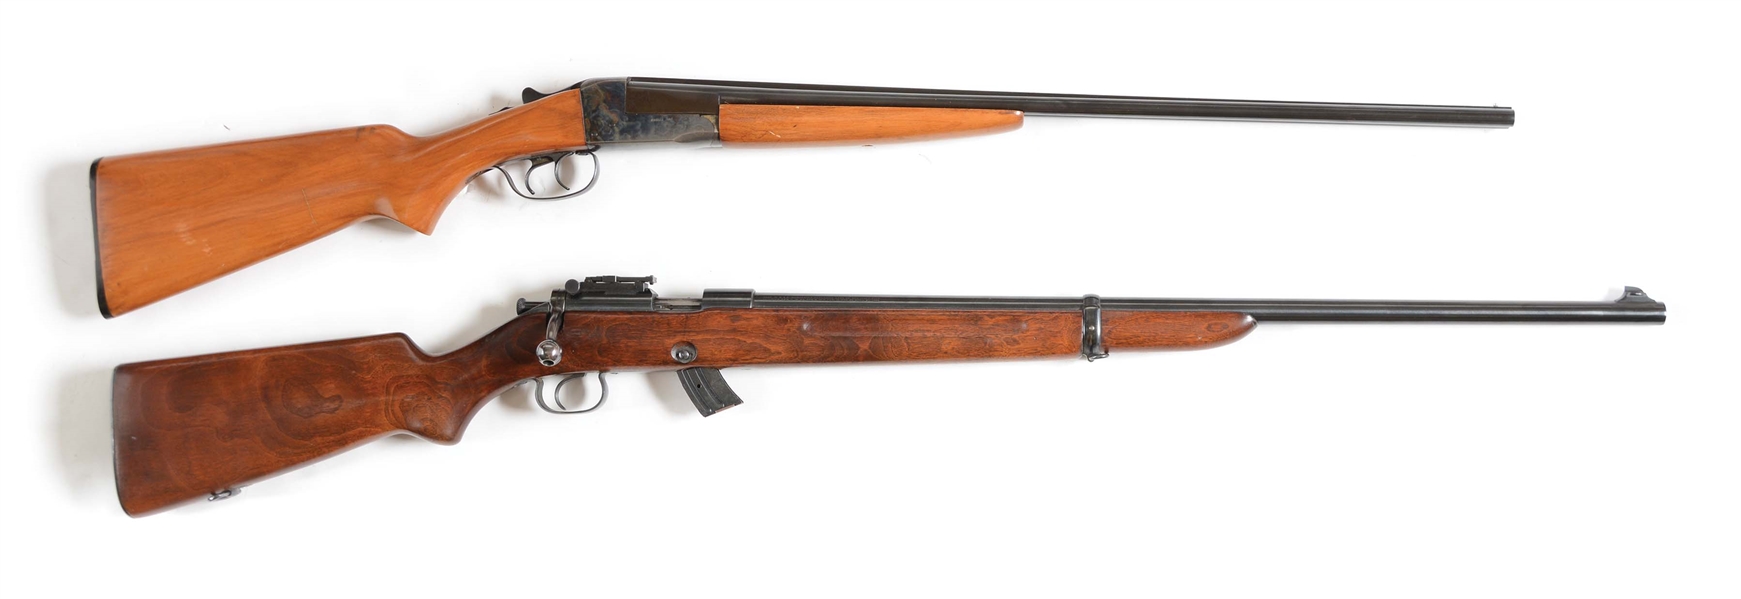 (M) LOT OF TWO: STEVENS .410 SIDE BY SIDE SHOTGUN AND WINCHESTER MODEL 52 BOLT ACTION RIFLE.